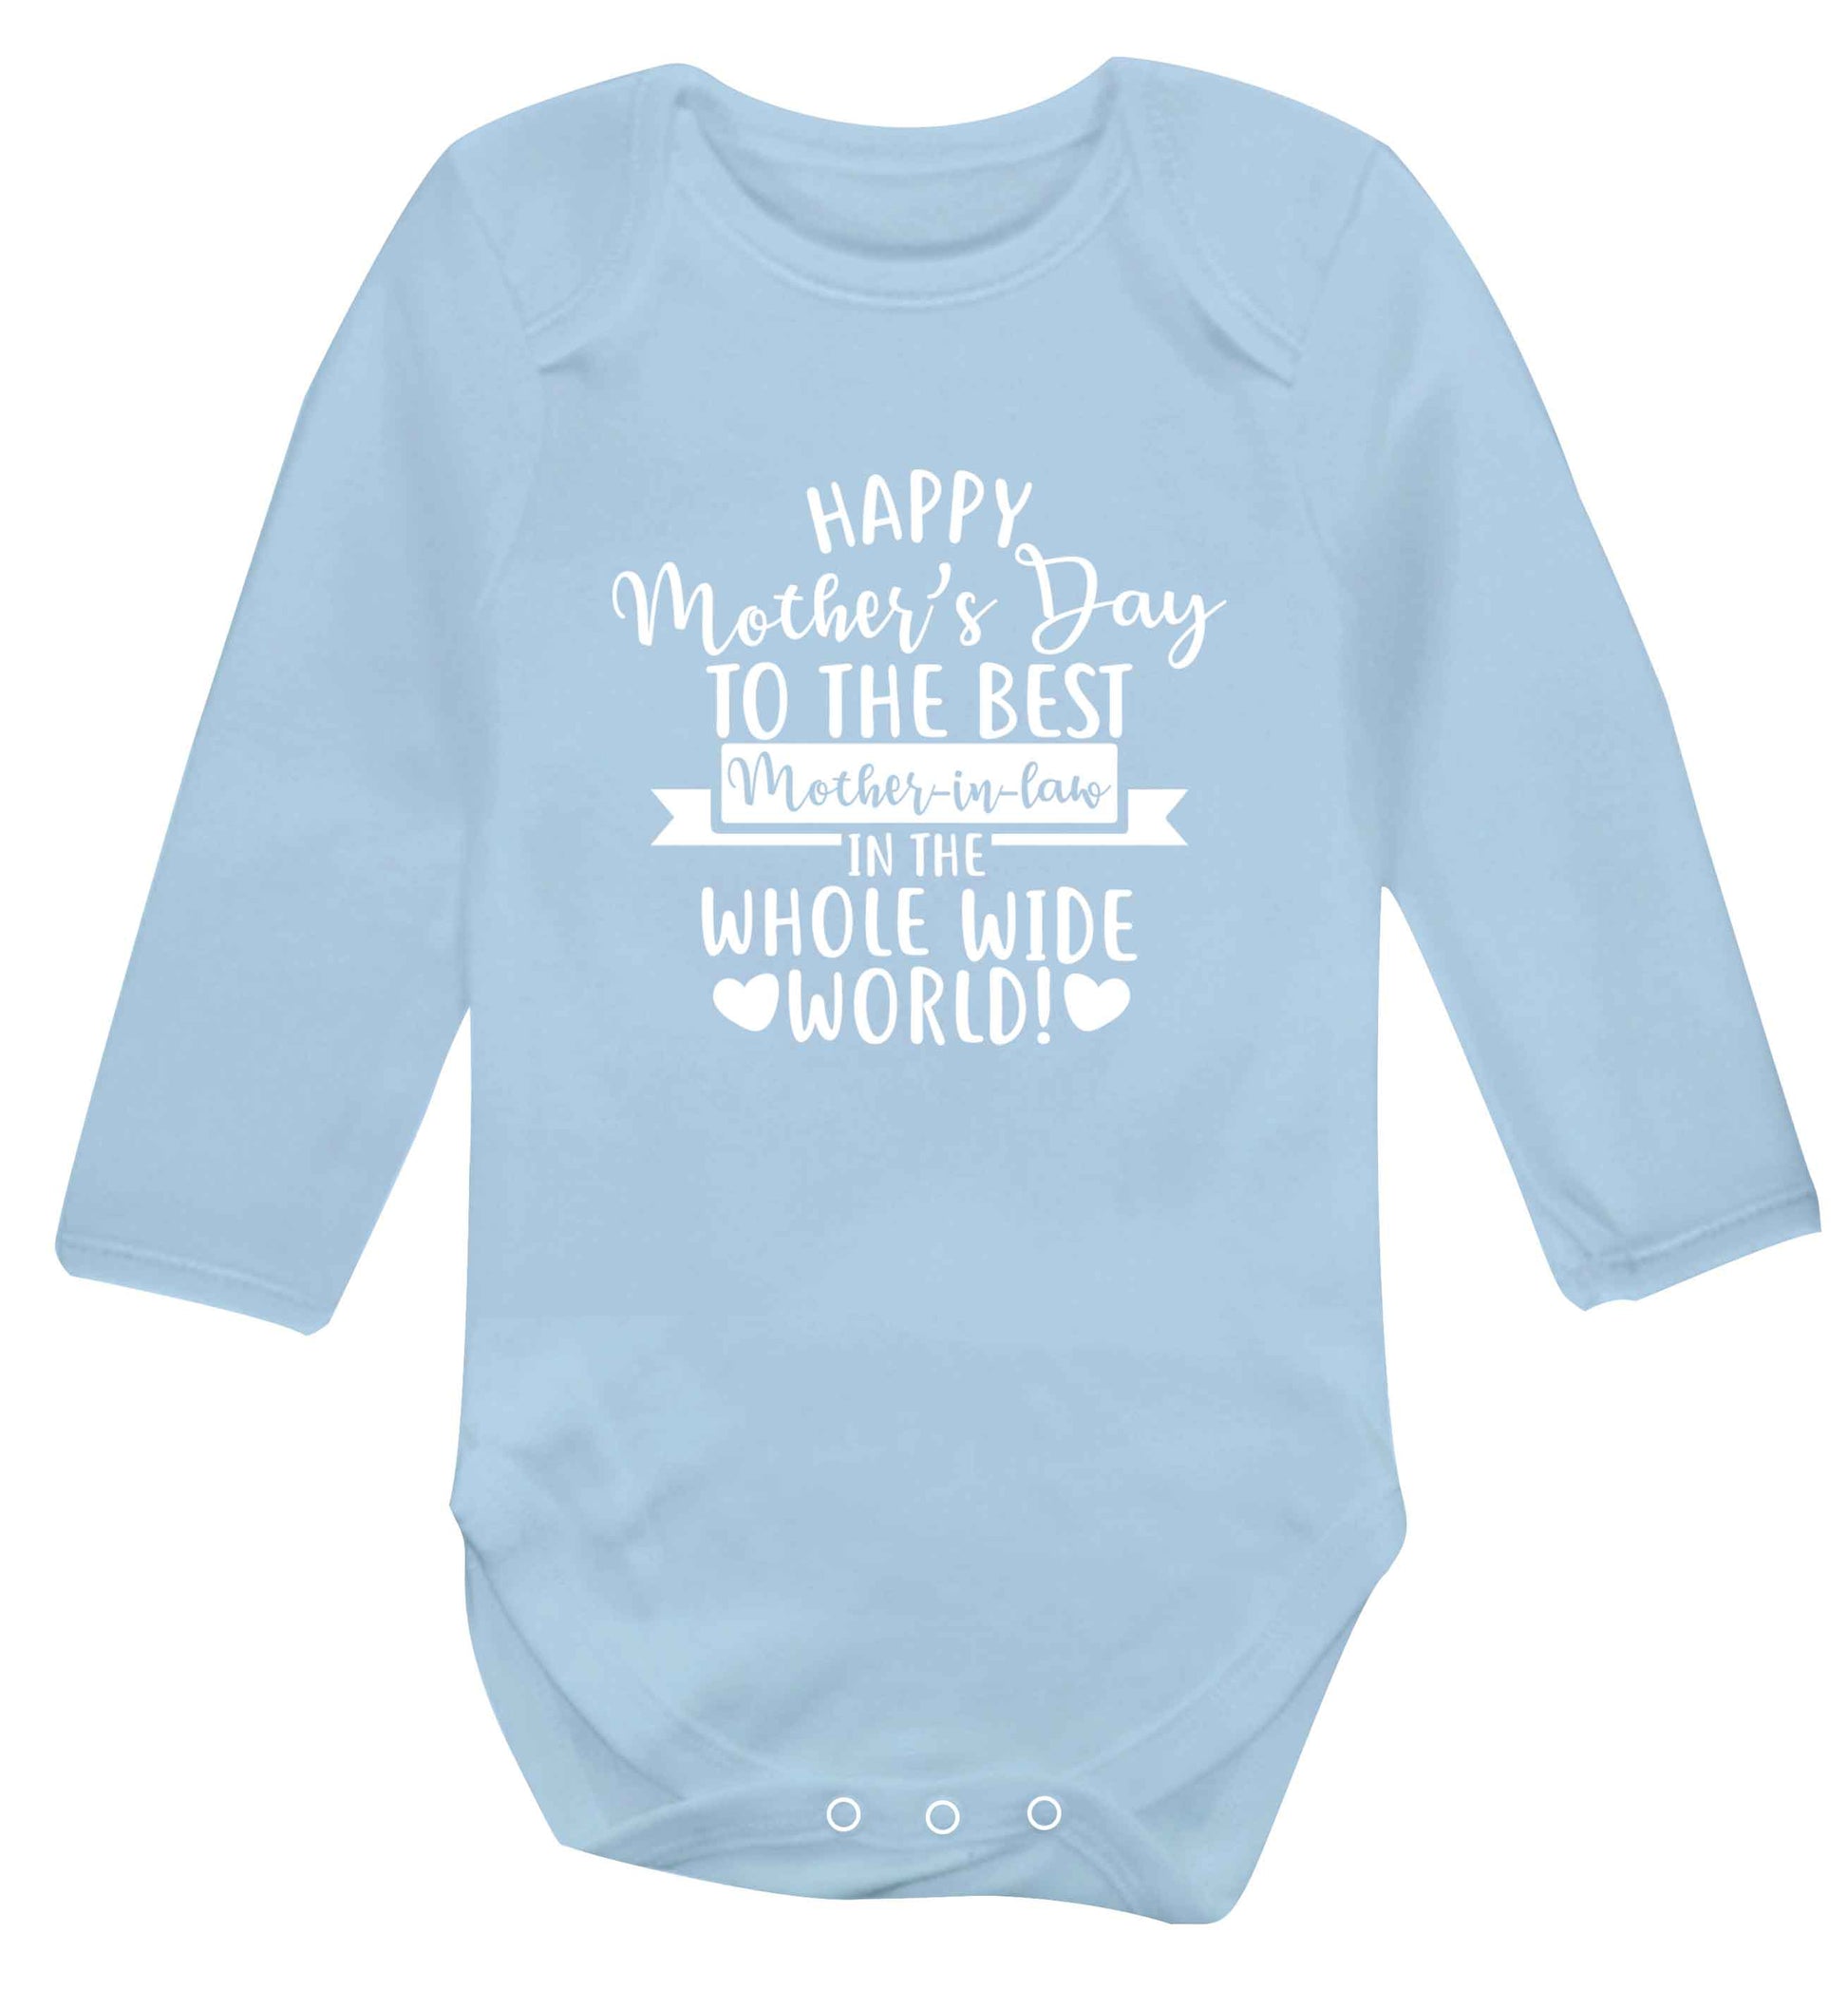 Happy mother's day to the best mother-in law in the world baby vest long sleeved pale blue 6-12 months